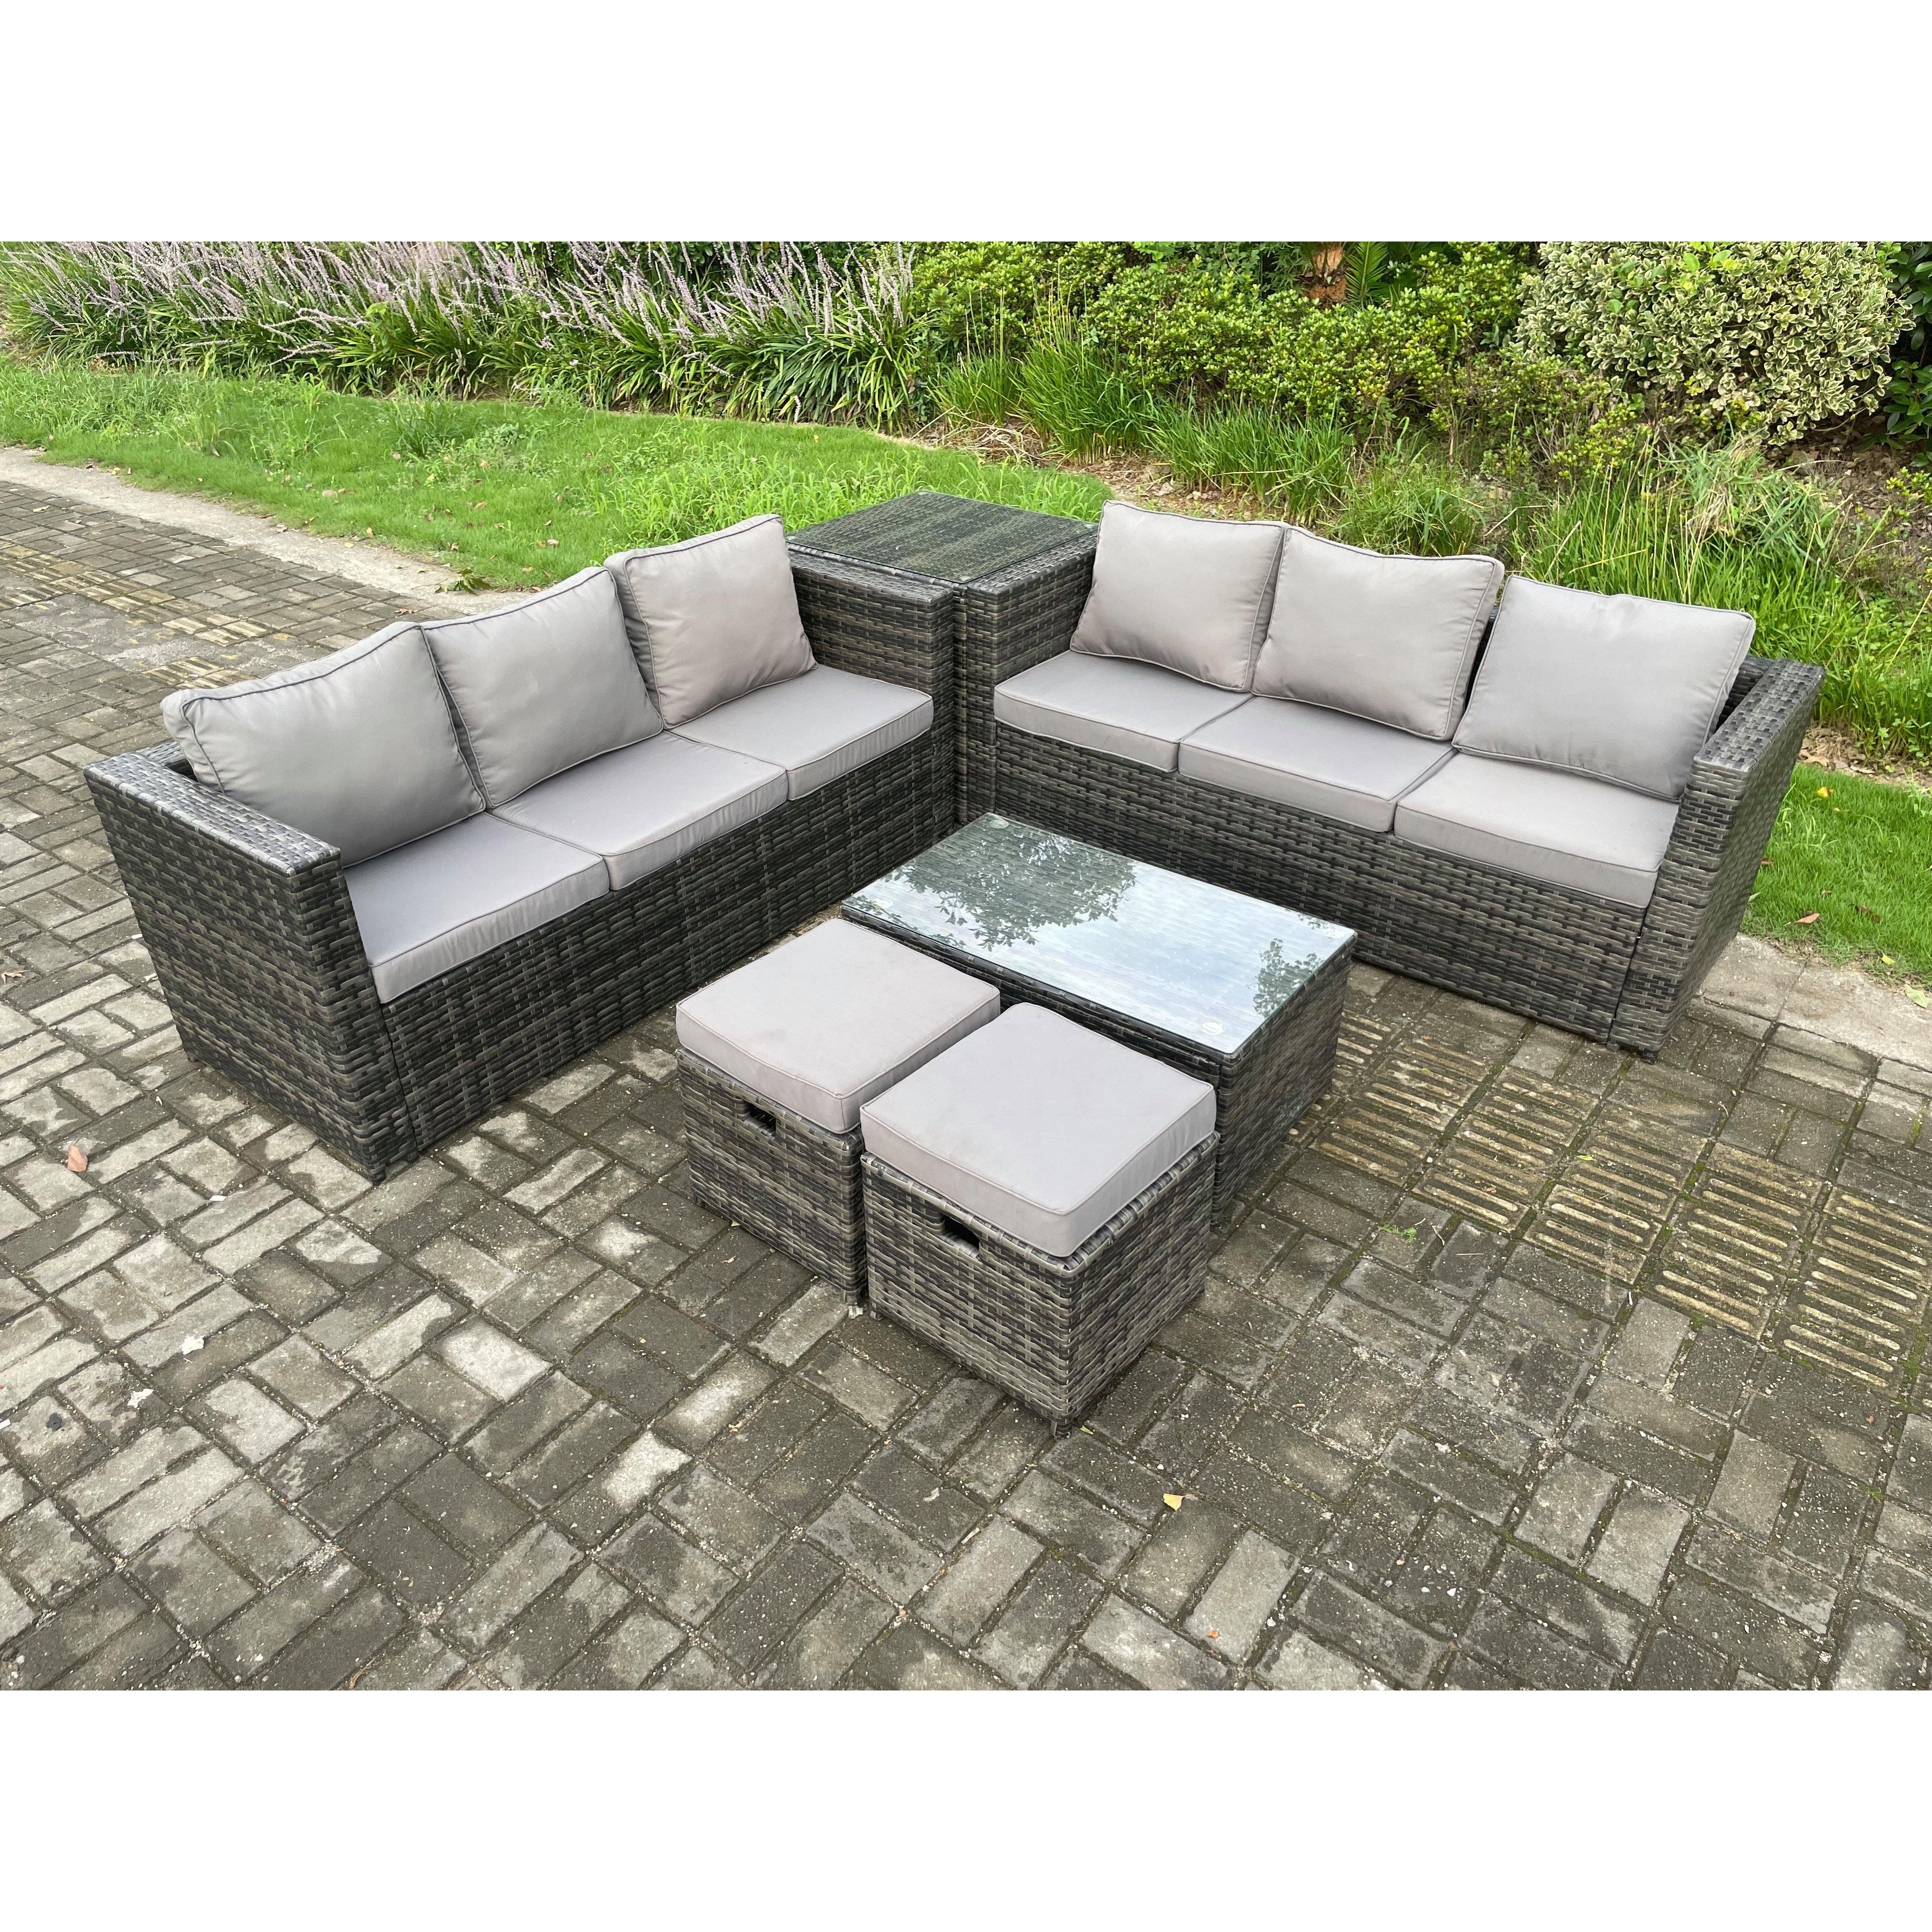 Rattan Garden Furniture Set Outdoor Patio Sofa Set with Oblong Coffee Table Side Table 2 Small Footstools 8 Seater - image 1